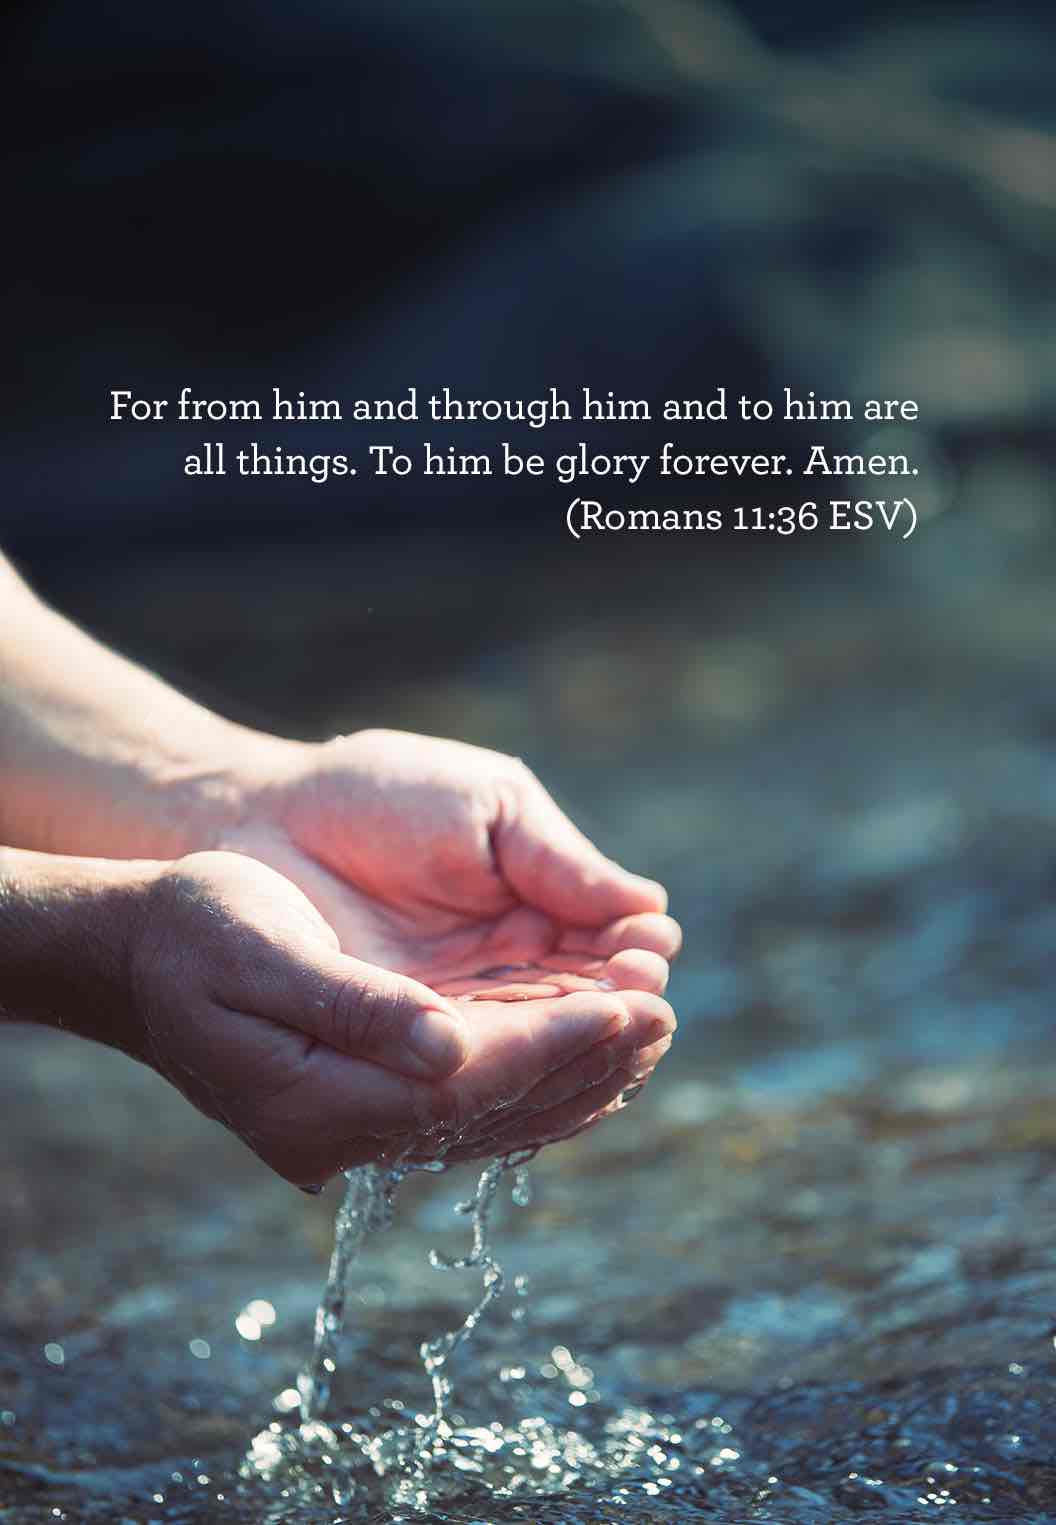 From Him Through Him and To Him are All Things